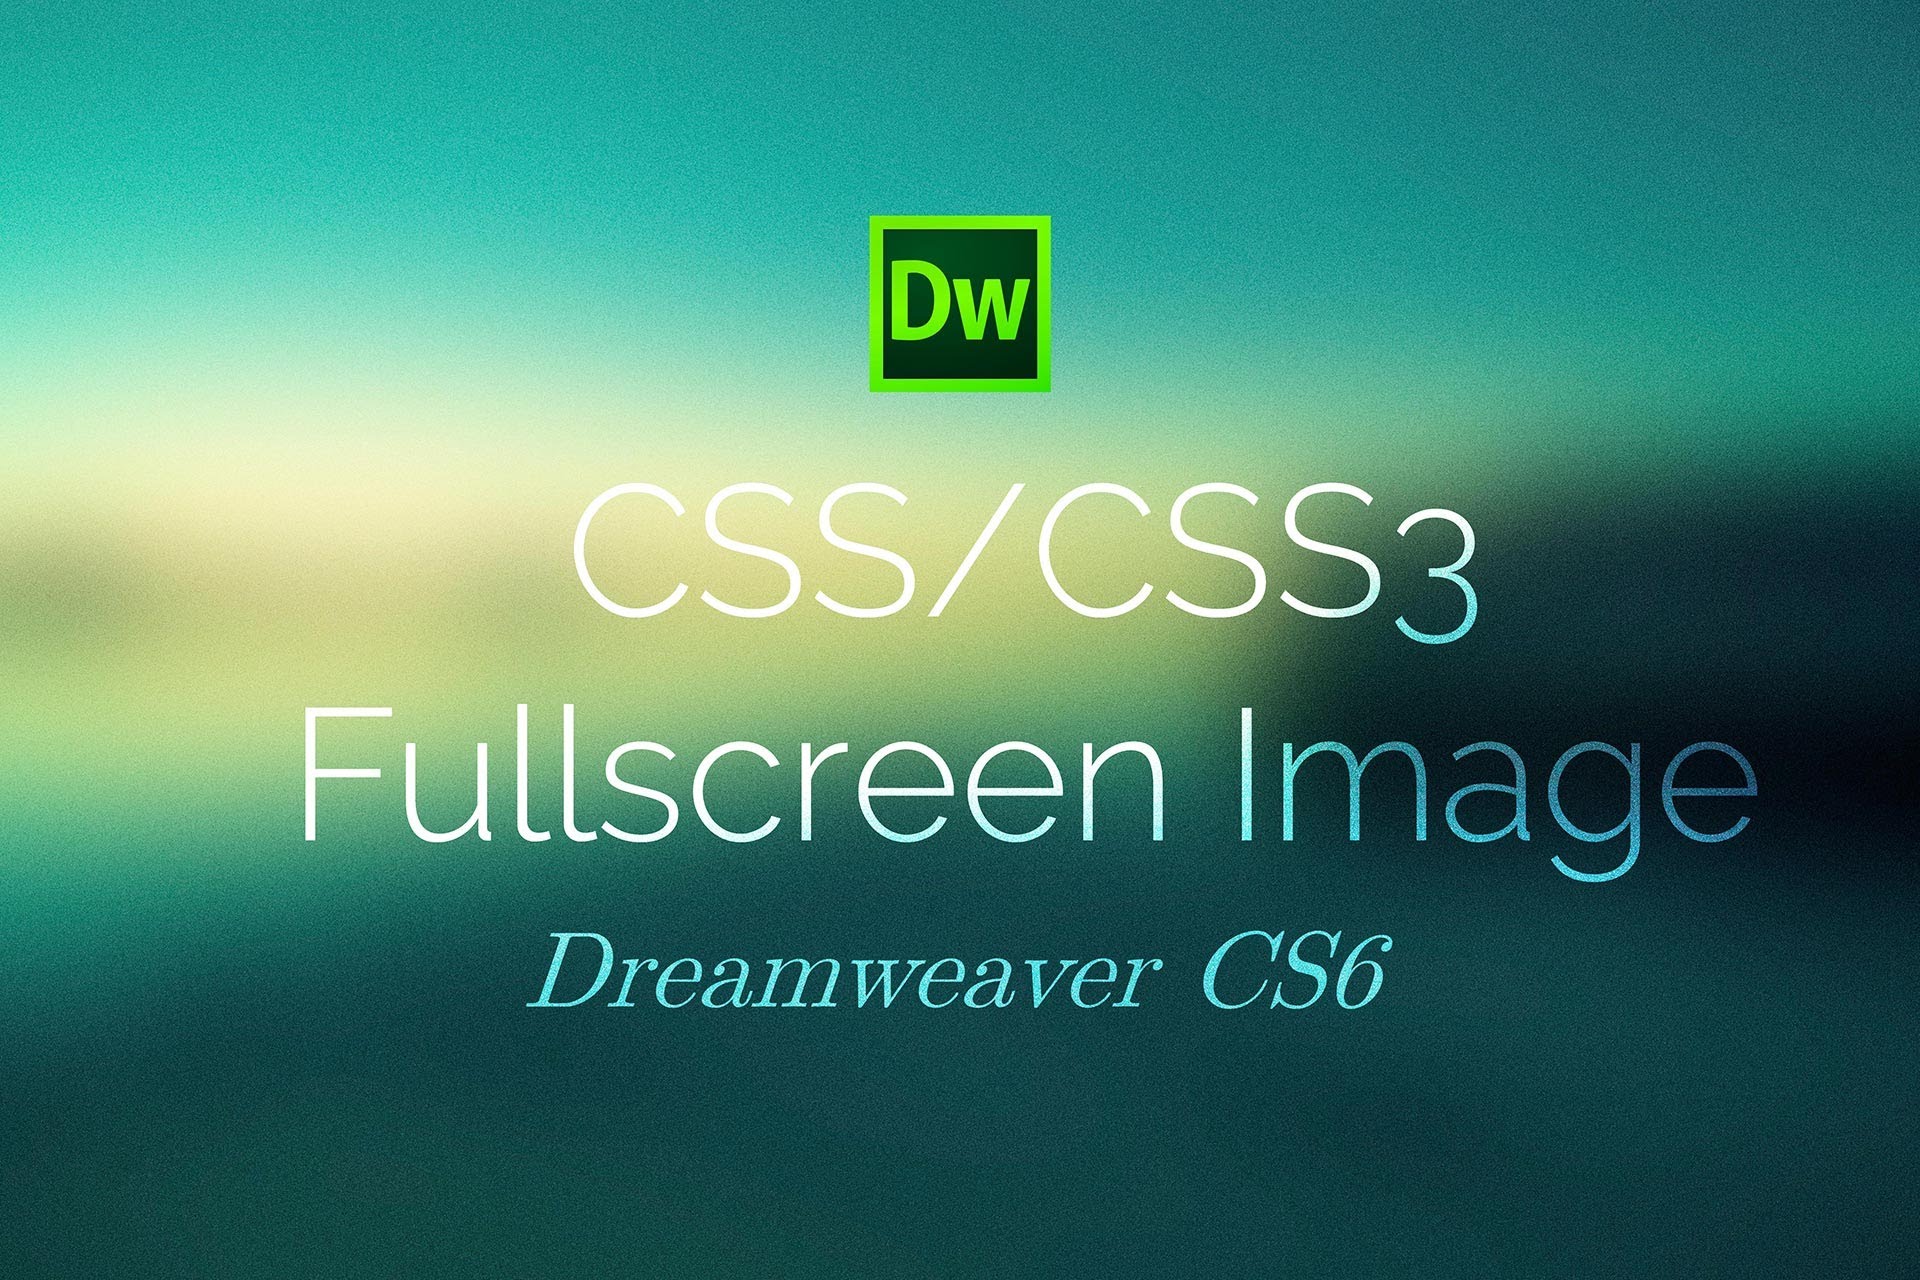 simple css background image swap